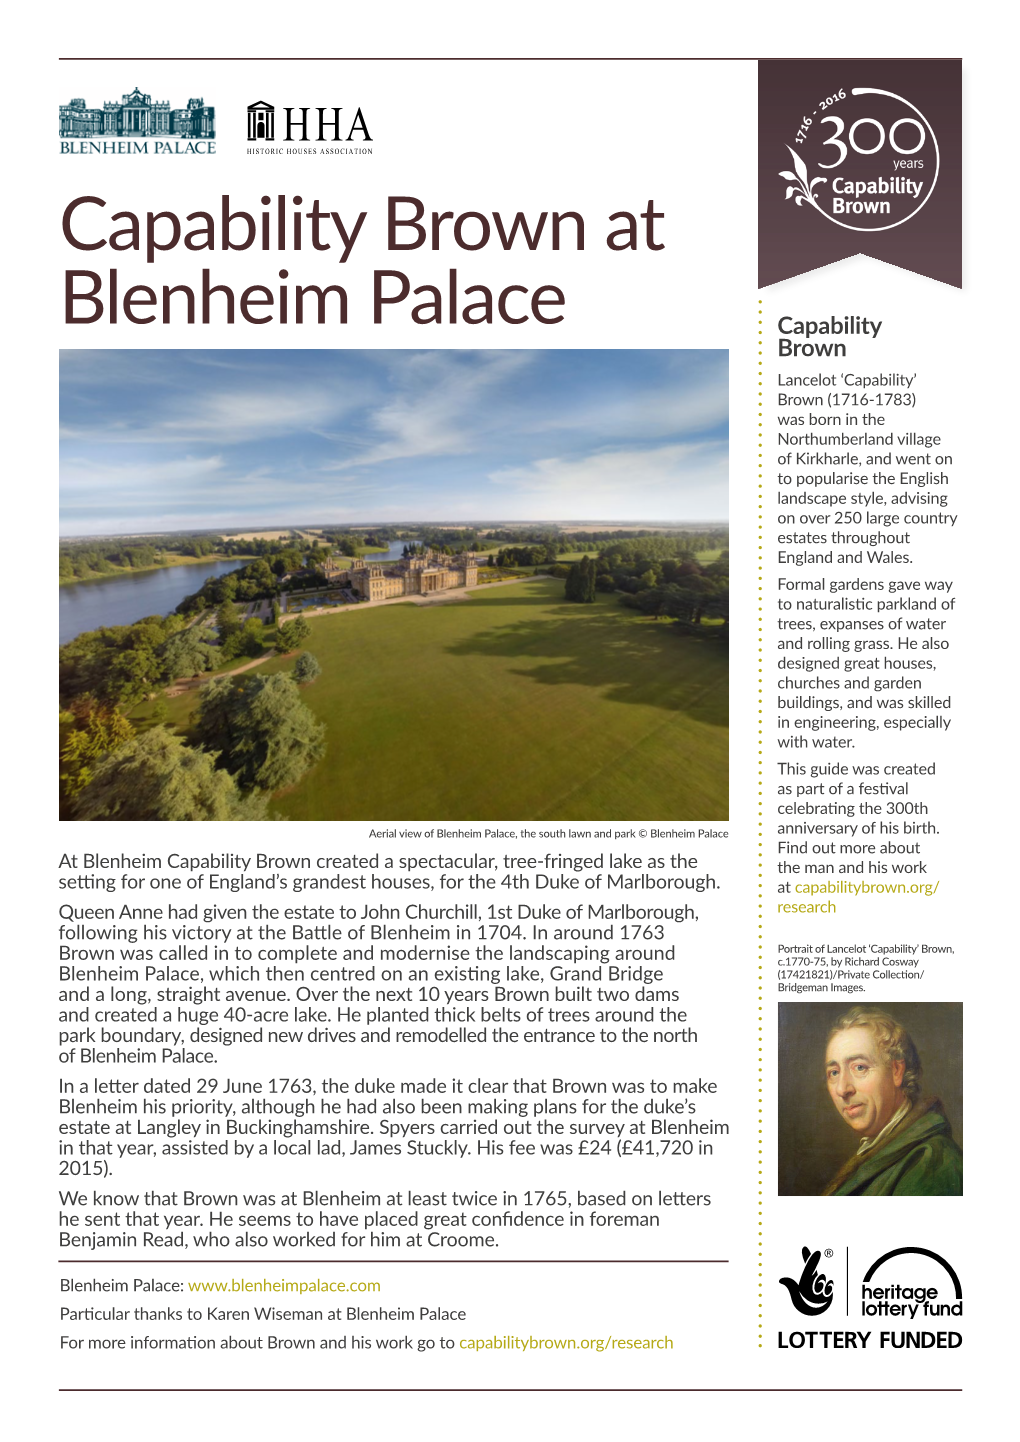 Capability Brown at Blenheim Palace